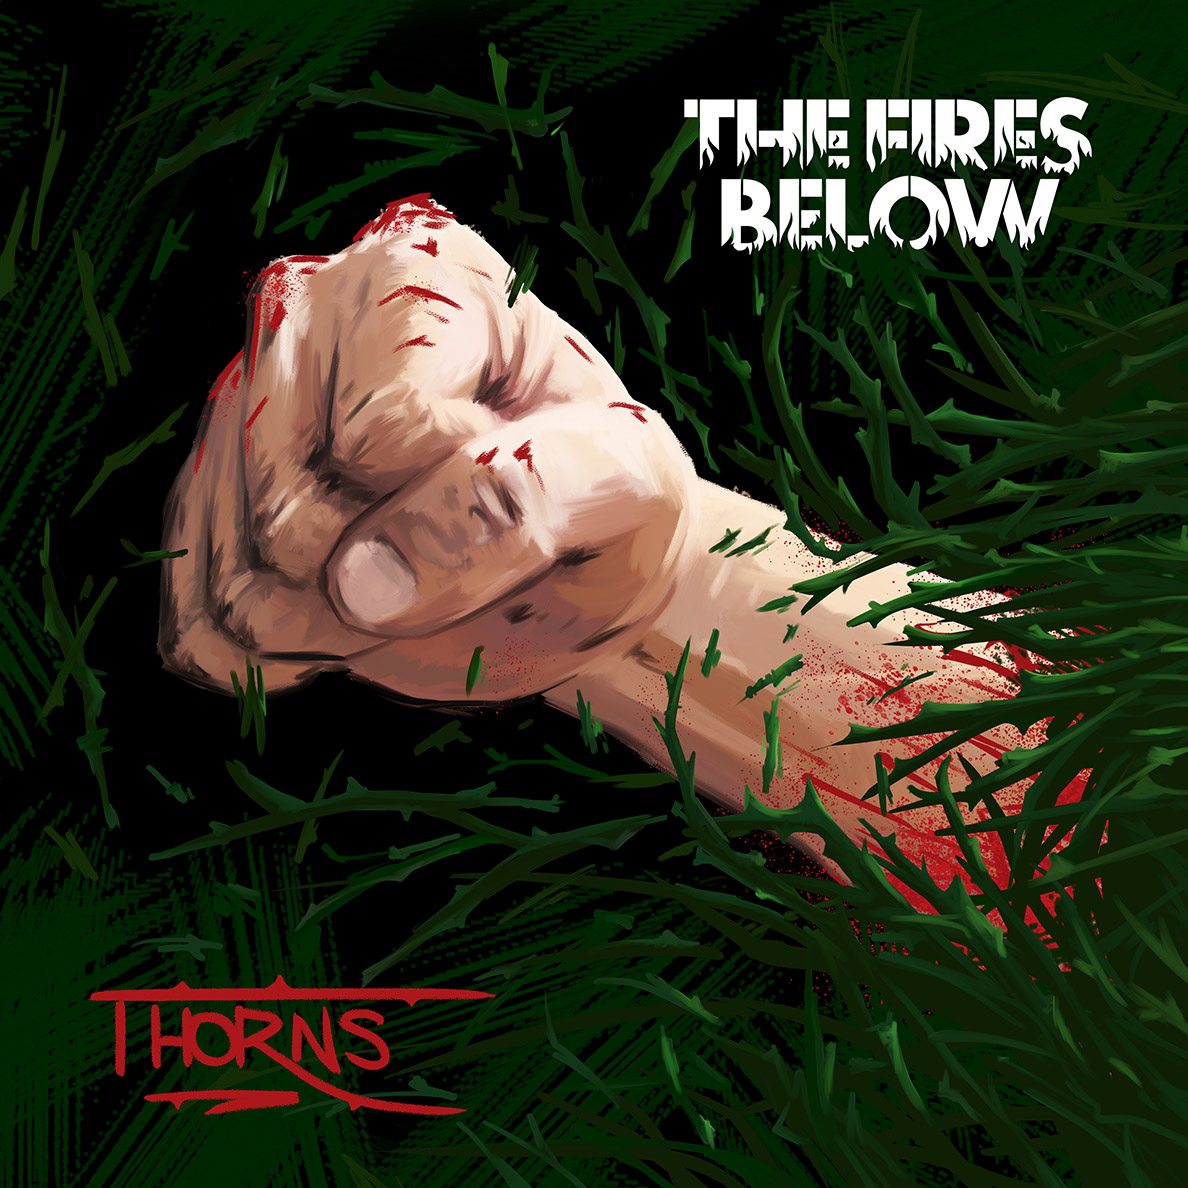 'grounds through the initiation and slanders the porcupine.' 😆 A quote from one of our most original reviews of our new EP by The Median Man. Many thanks to him for the review. Read the other fine words here: themedianman.com/the-fires-belo… @SaNPRuk #thefiresbelow #rock #punk #metal